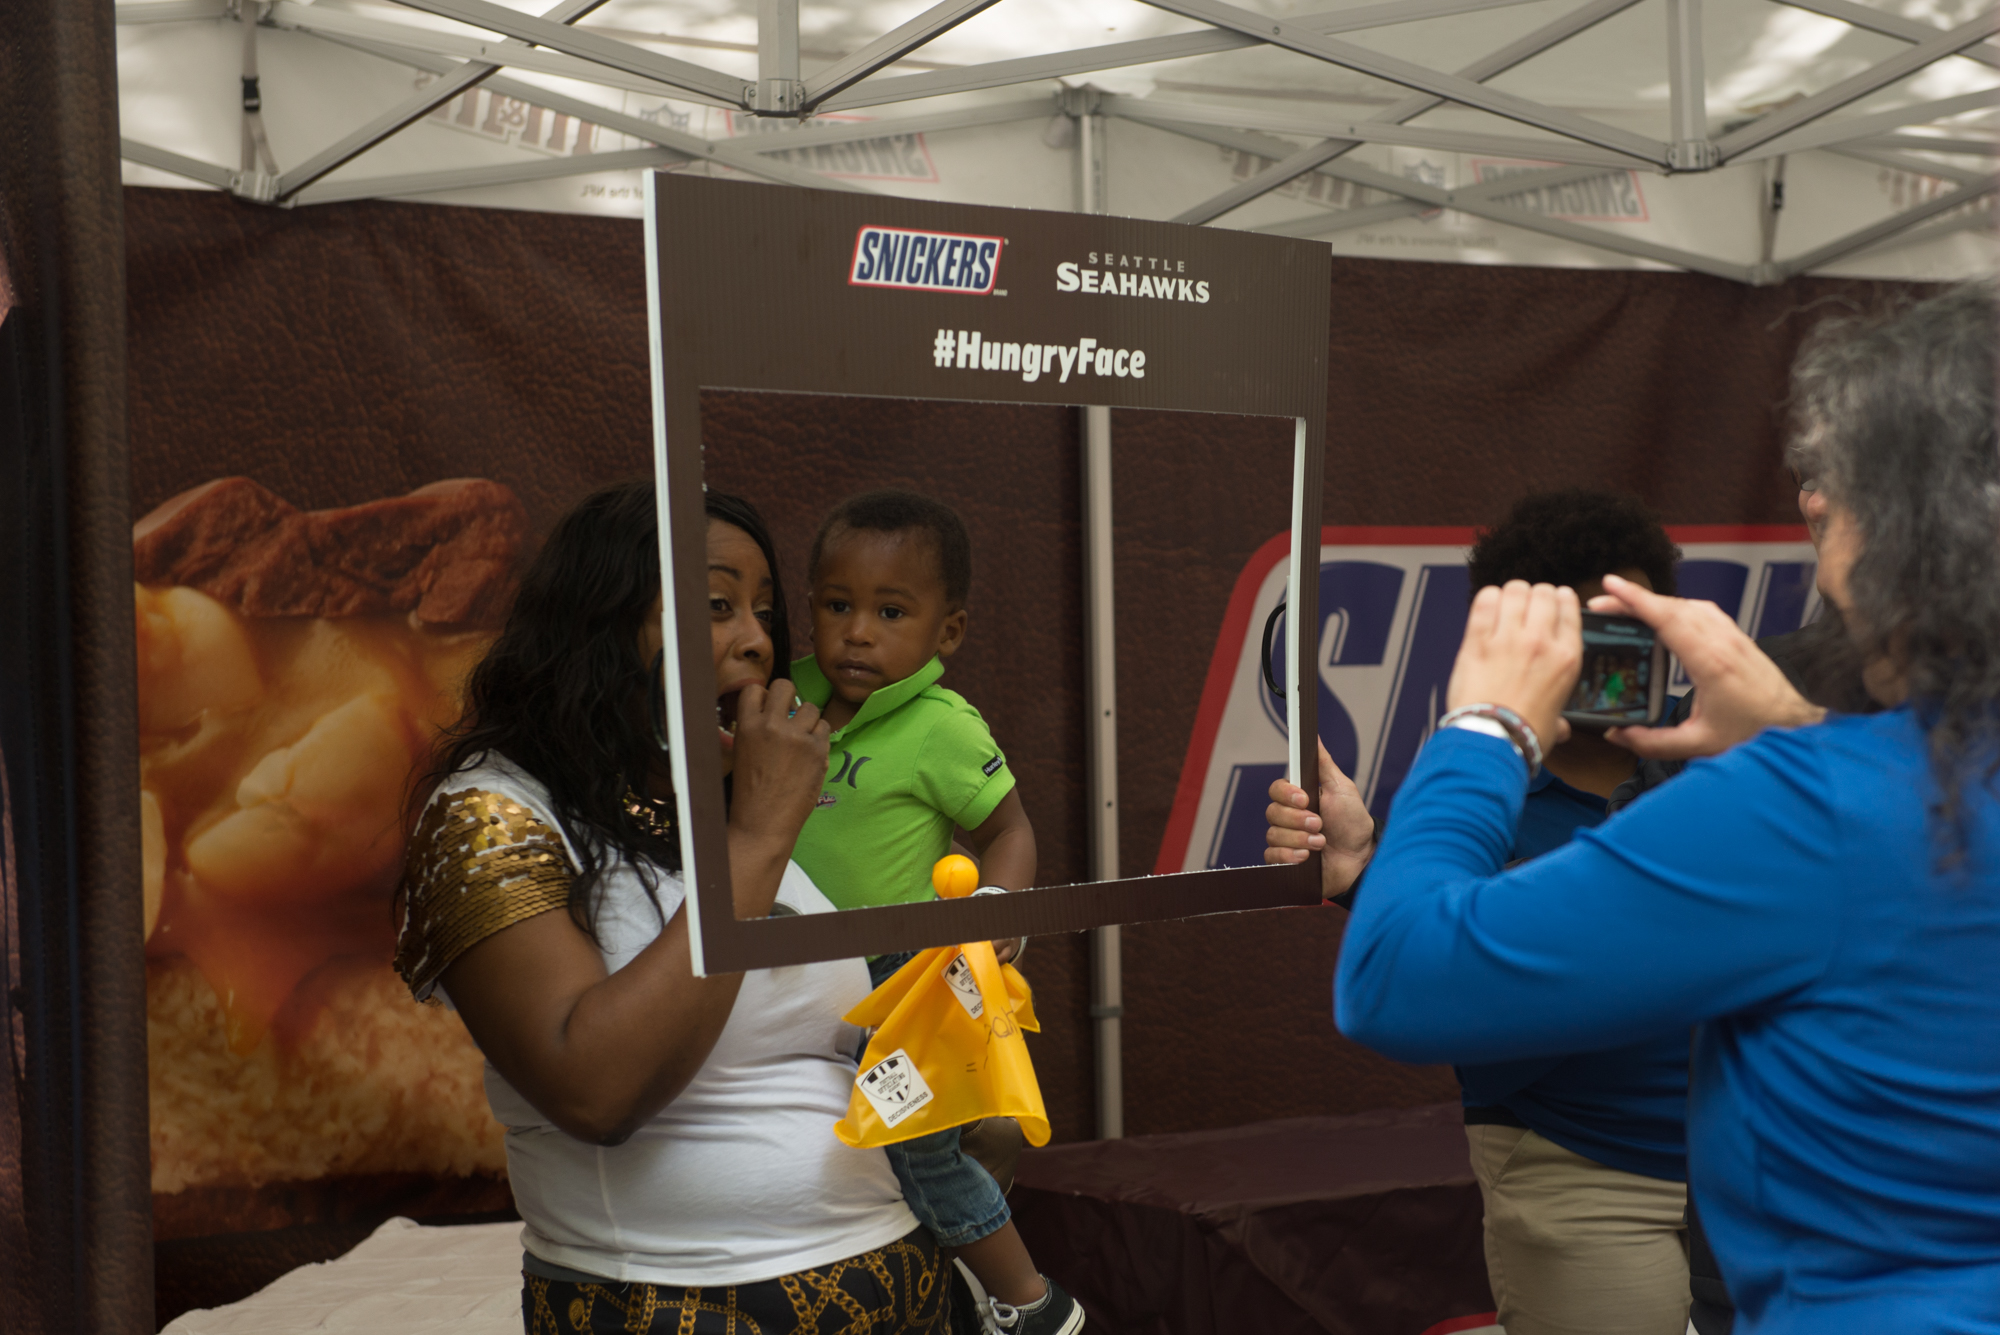 Selfies with hashtags were all the rage with the vendors. Photo by Morgen Schuler